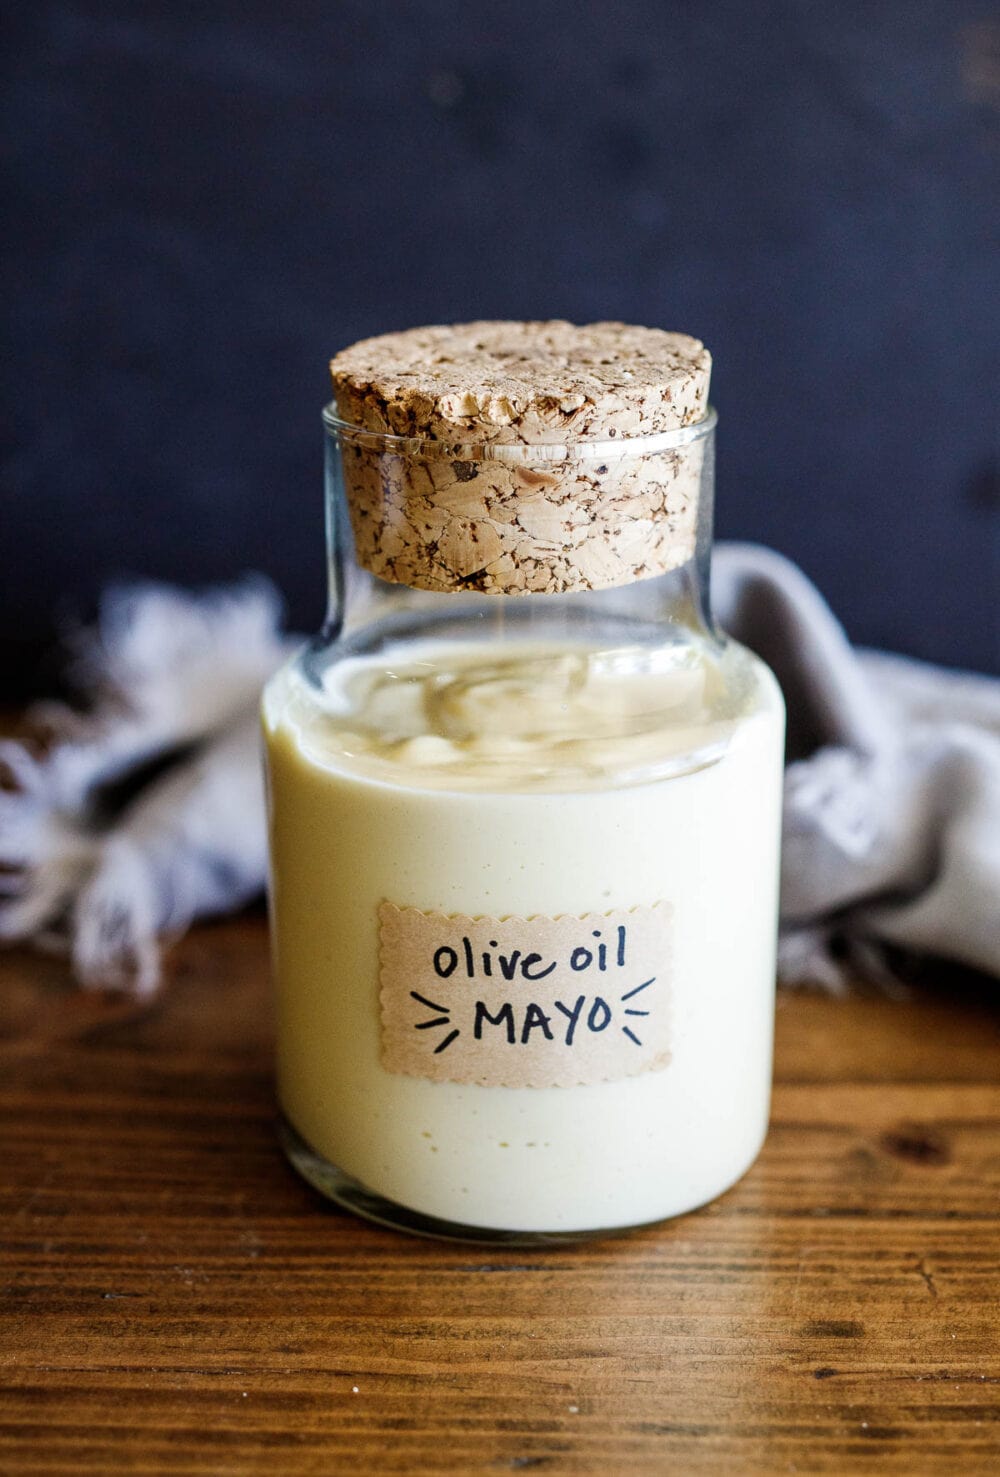 This simple, easy mayonnaise recipe is made with olive oil and can be made in a blender, food processor,  whisked by hand, or use an immersion blender. Keep it in the fridge for up to 3 weeks!